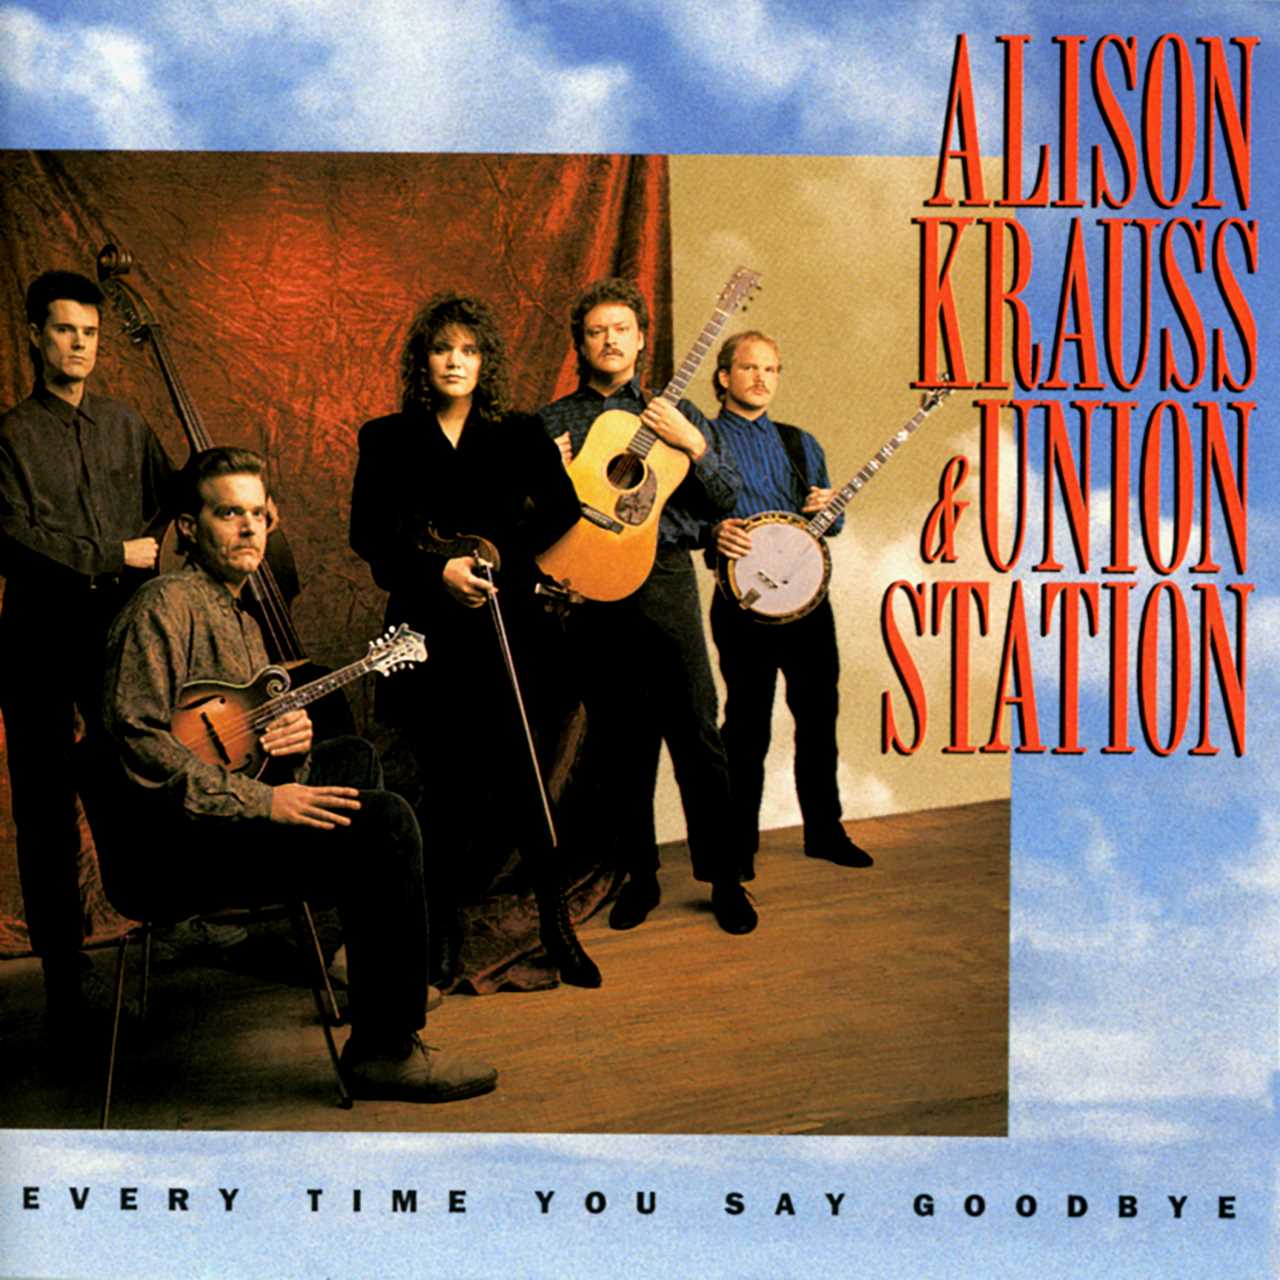 Alison Krauss & Union Station - Every Time You Say Goodbye cover album